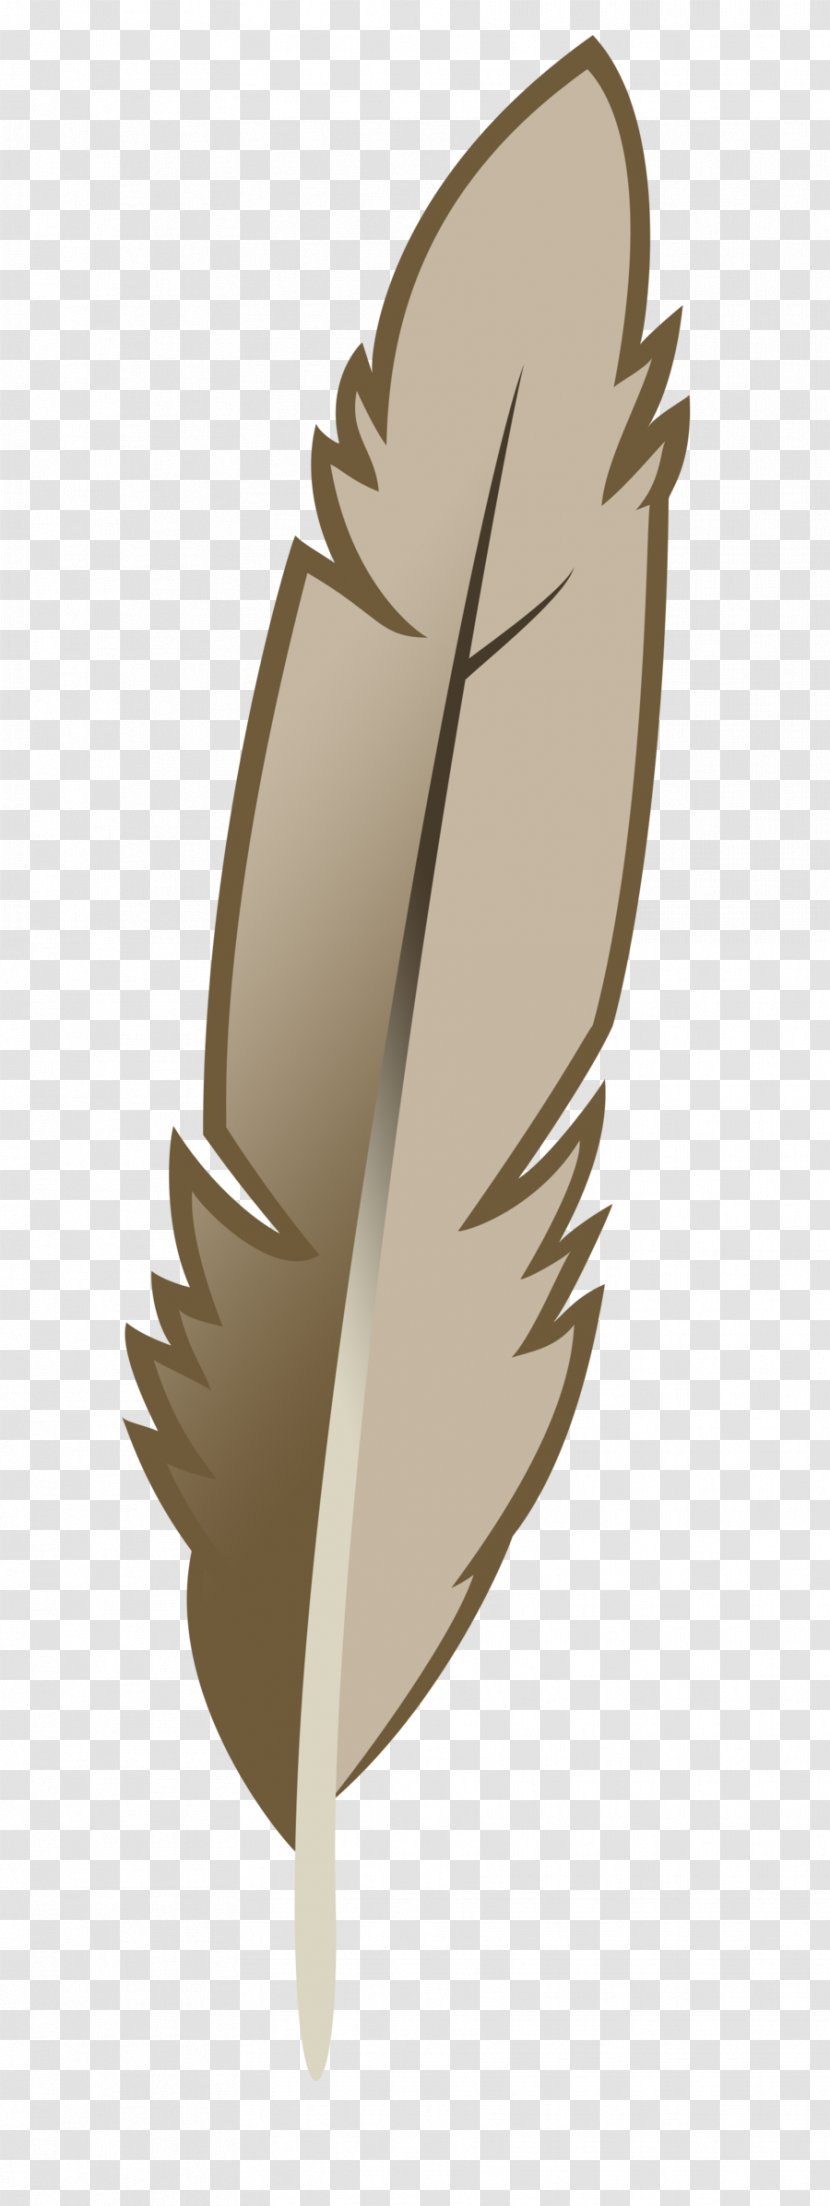 Eagle Feather Law Bird Drawing - Wing - Boho Arrow Transparent PNG